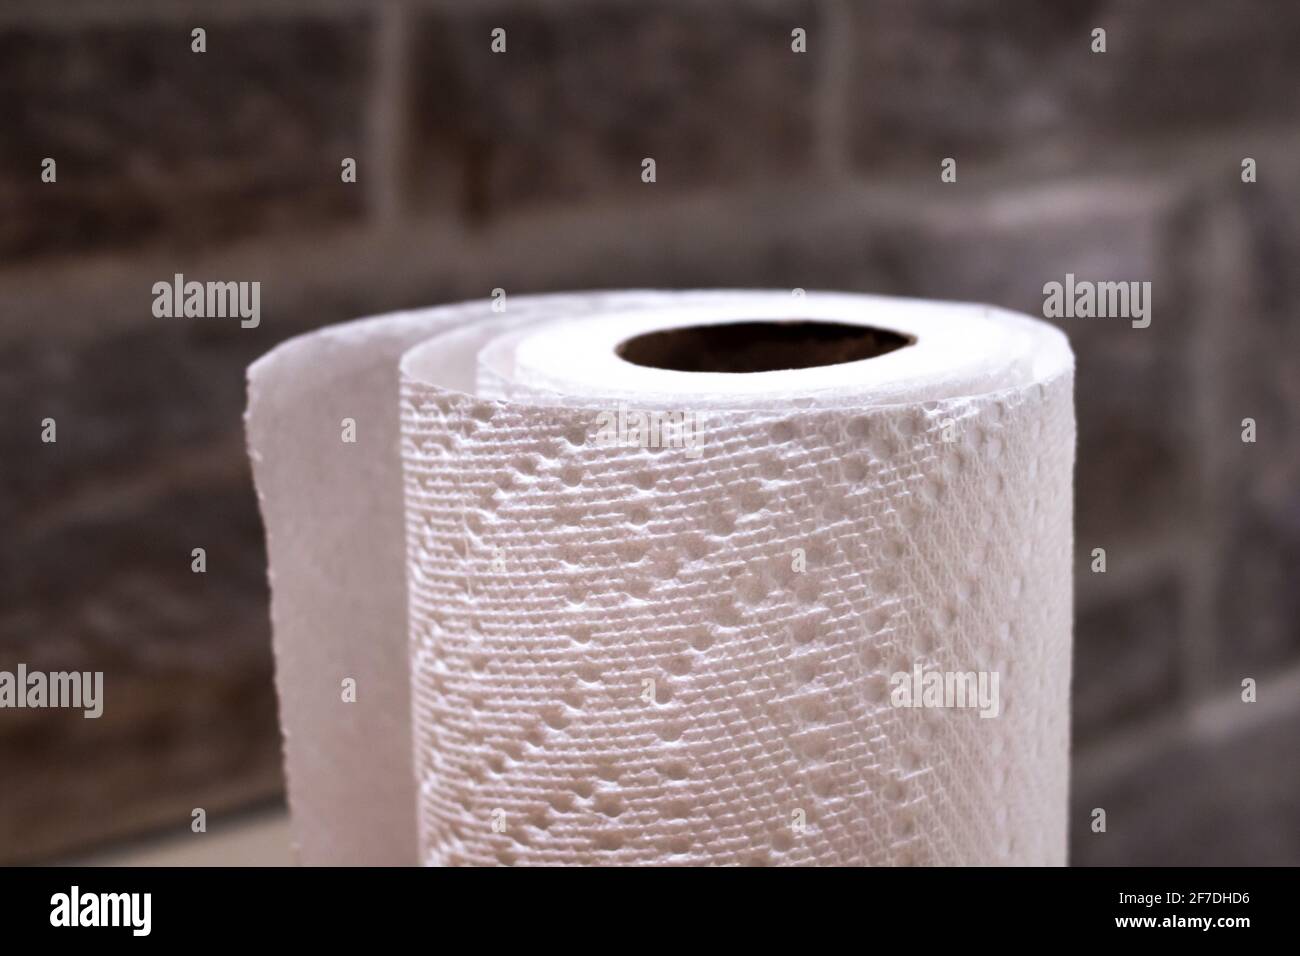 Crisp white roll of paper towel, Toronto, Canada. Cleaning supplies for COVID-19 pandemic. Stock Photo